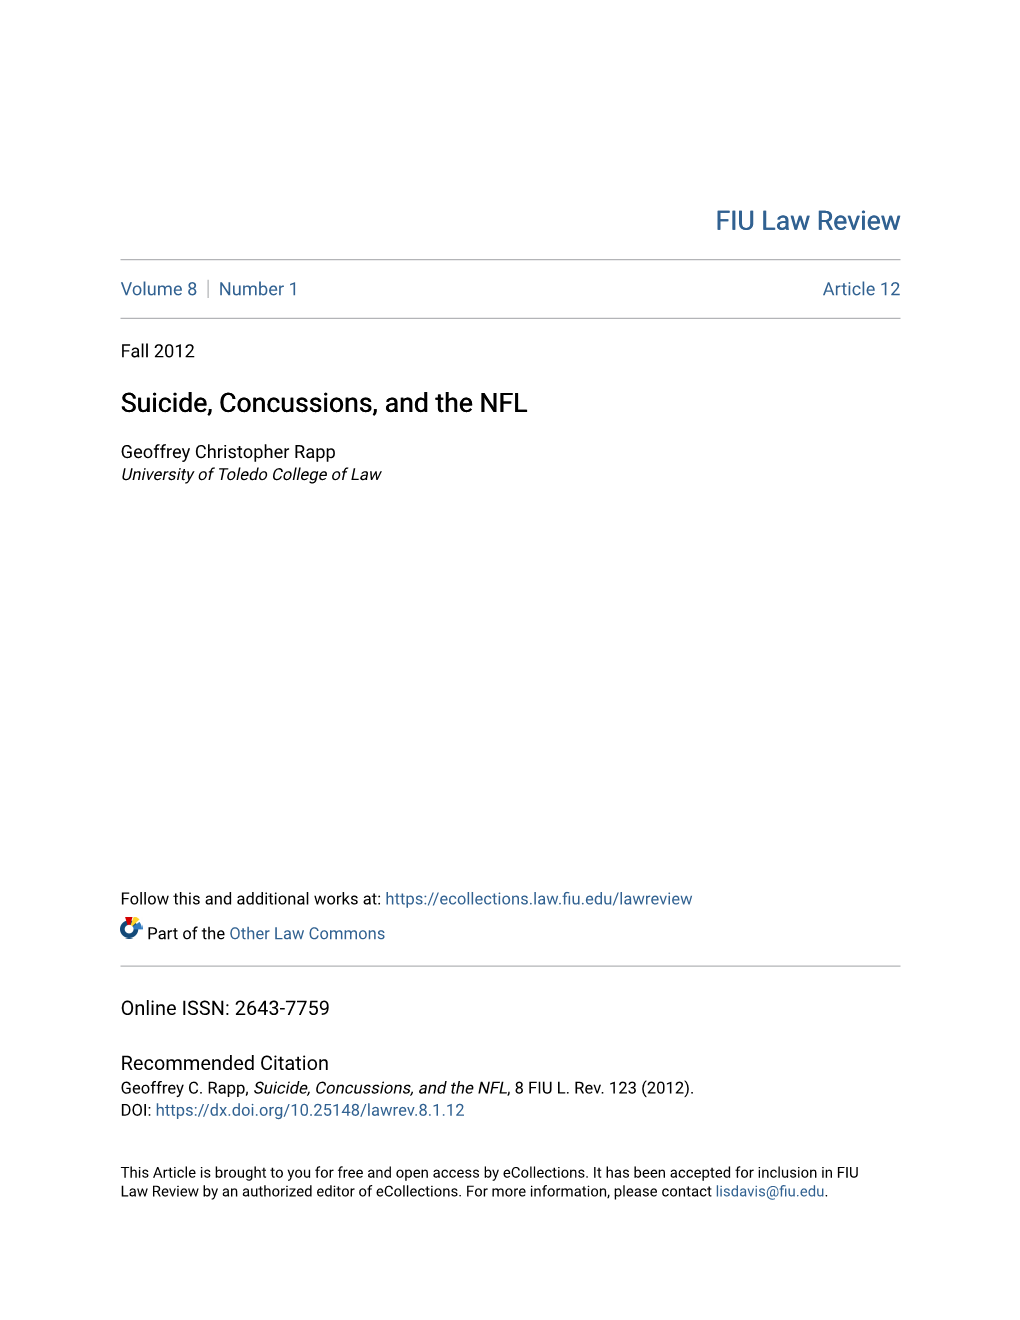 Suicide, Concussions, and the NFL